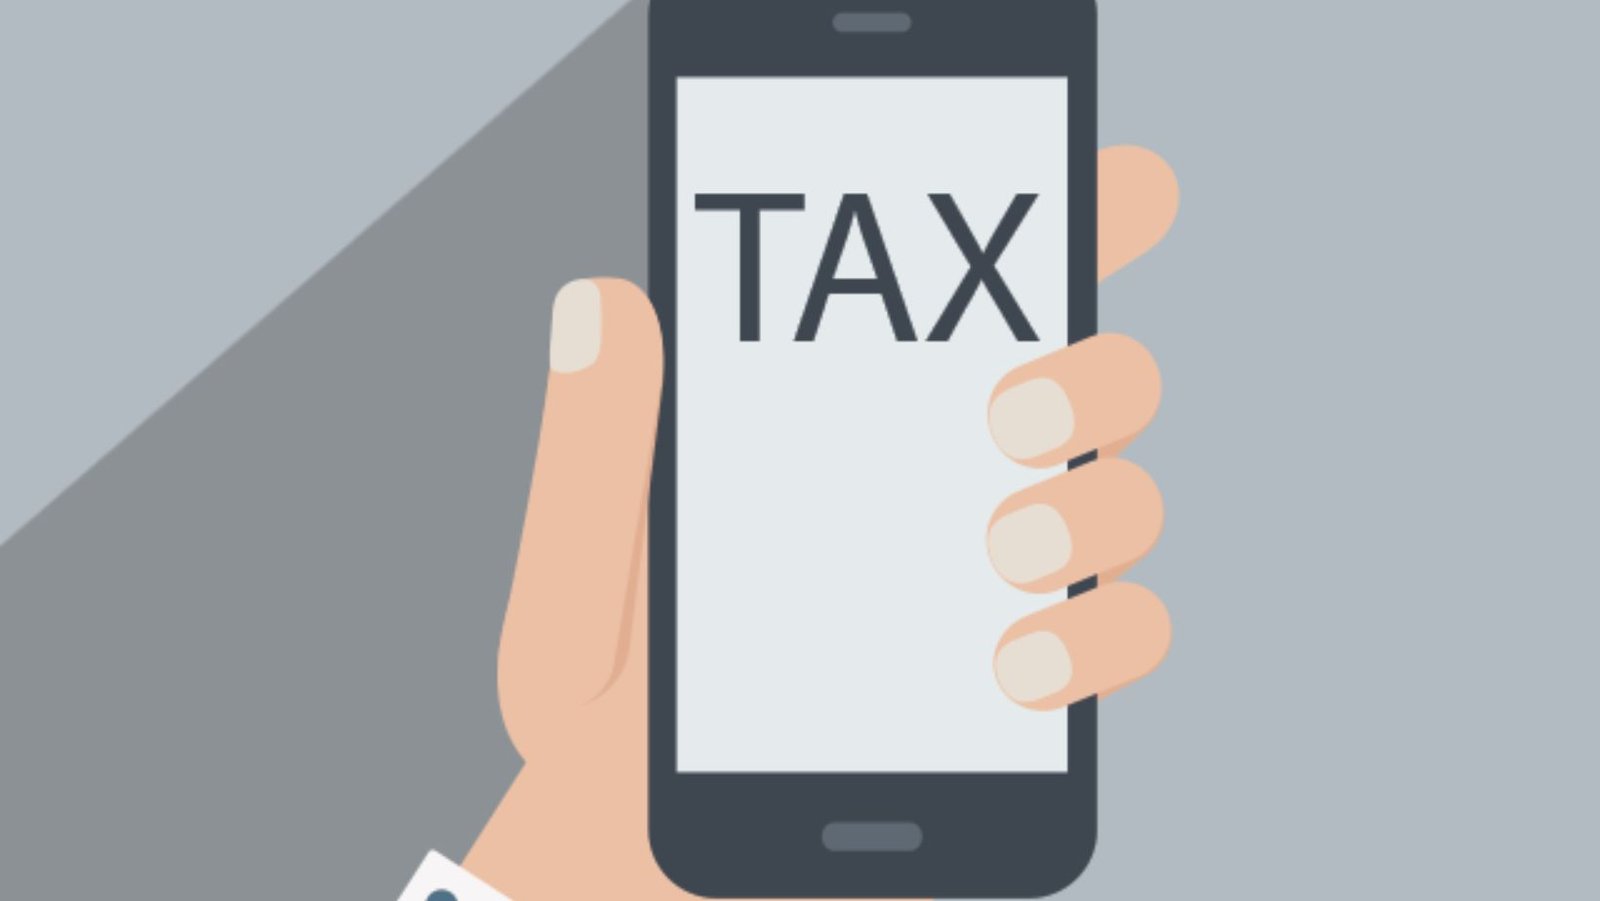 Withholding tax on mobile recharge is justified, according to the Finance Ministry